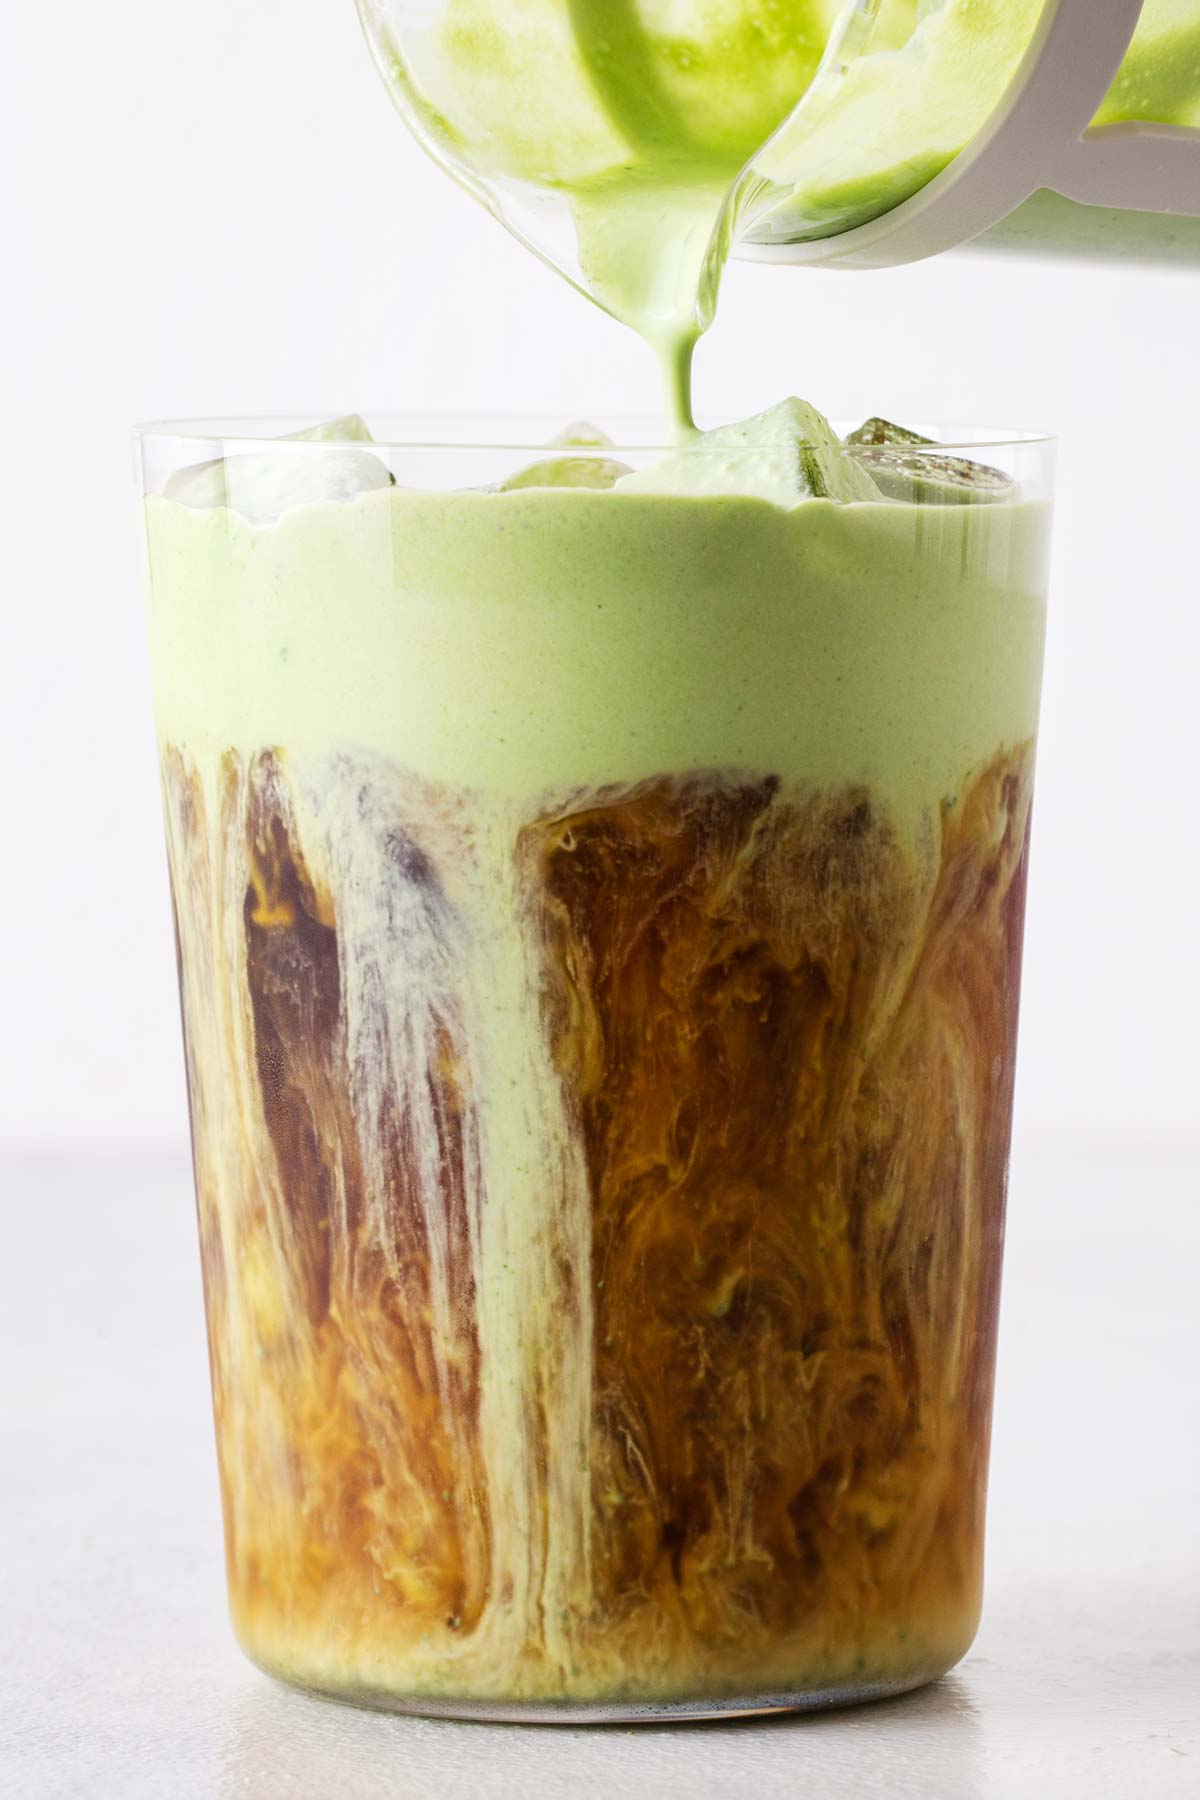 Matcha cold foam being poured over an iced coffee in a tall glass.